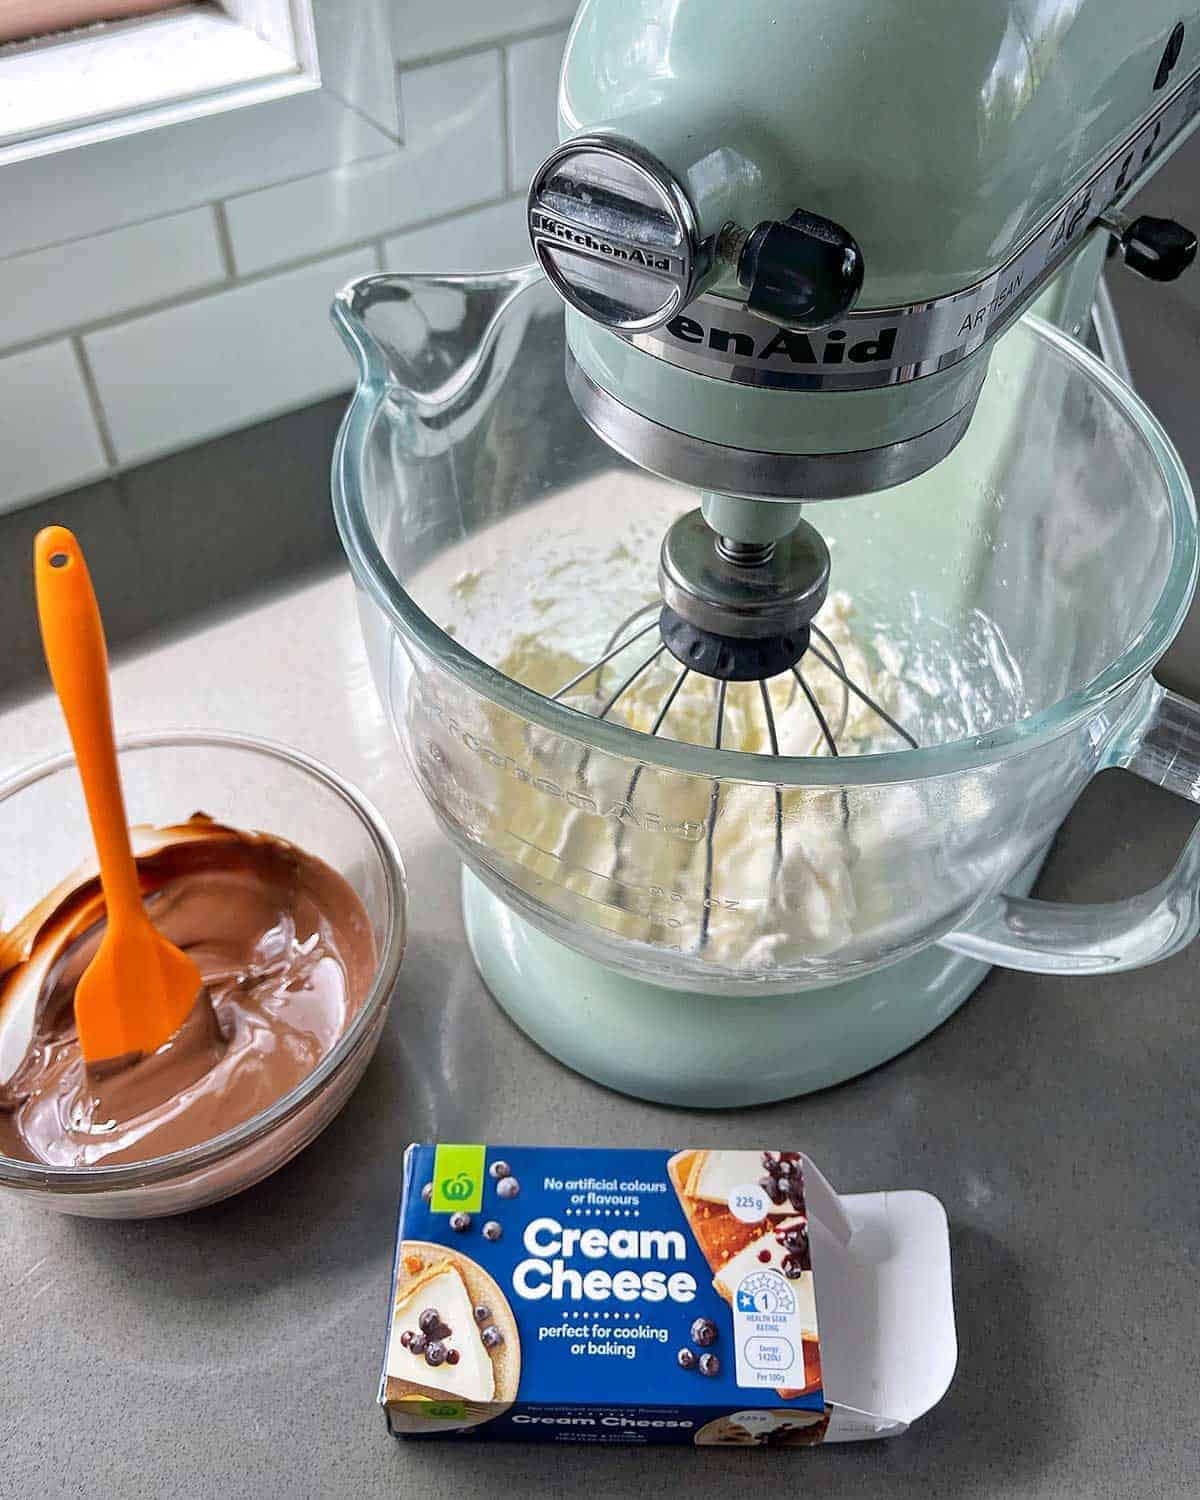 A stand mixer with cream cheese in it next to a bowl of melted chocolate and a packet of cream cheese.